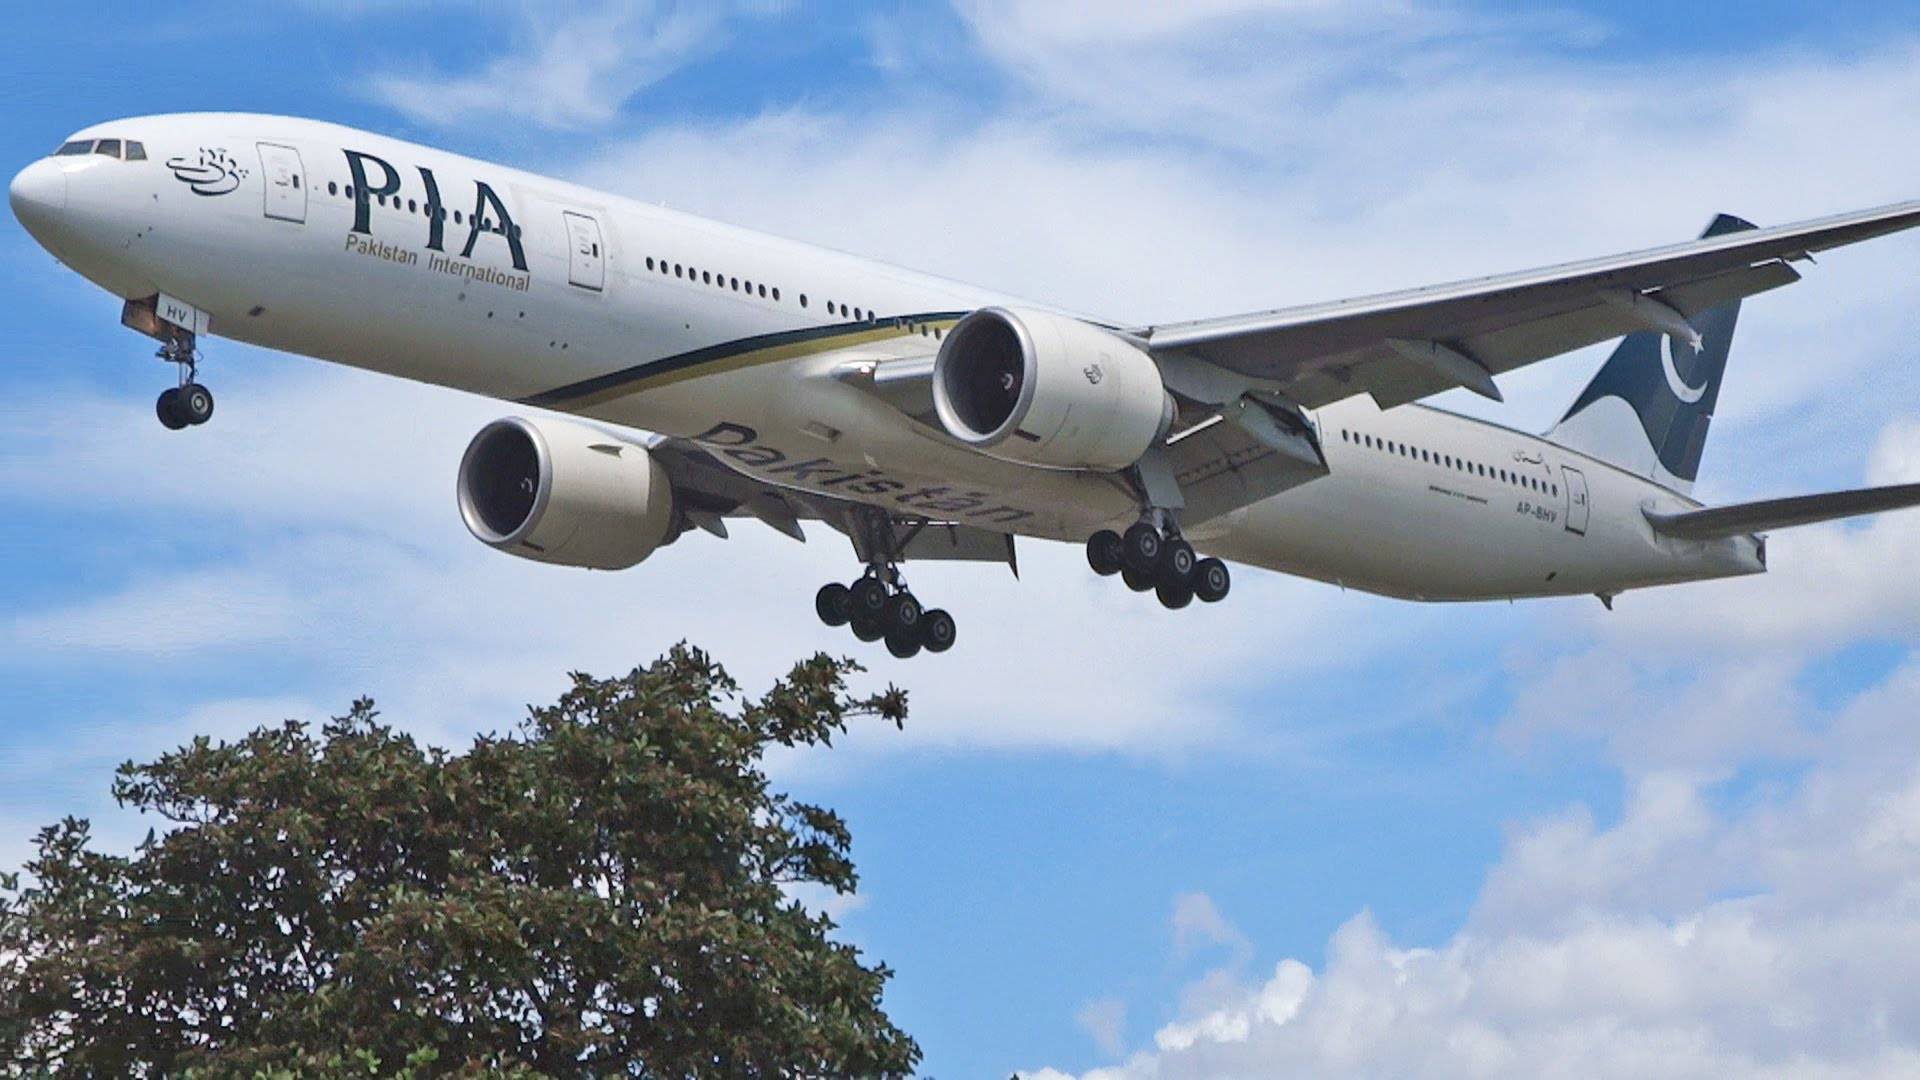 PIA has initiated refurbishing and change of interior of its entire fleet.